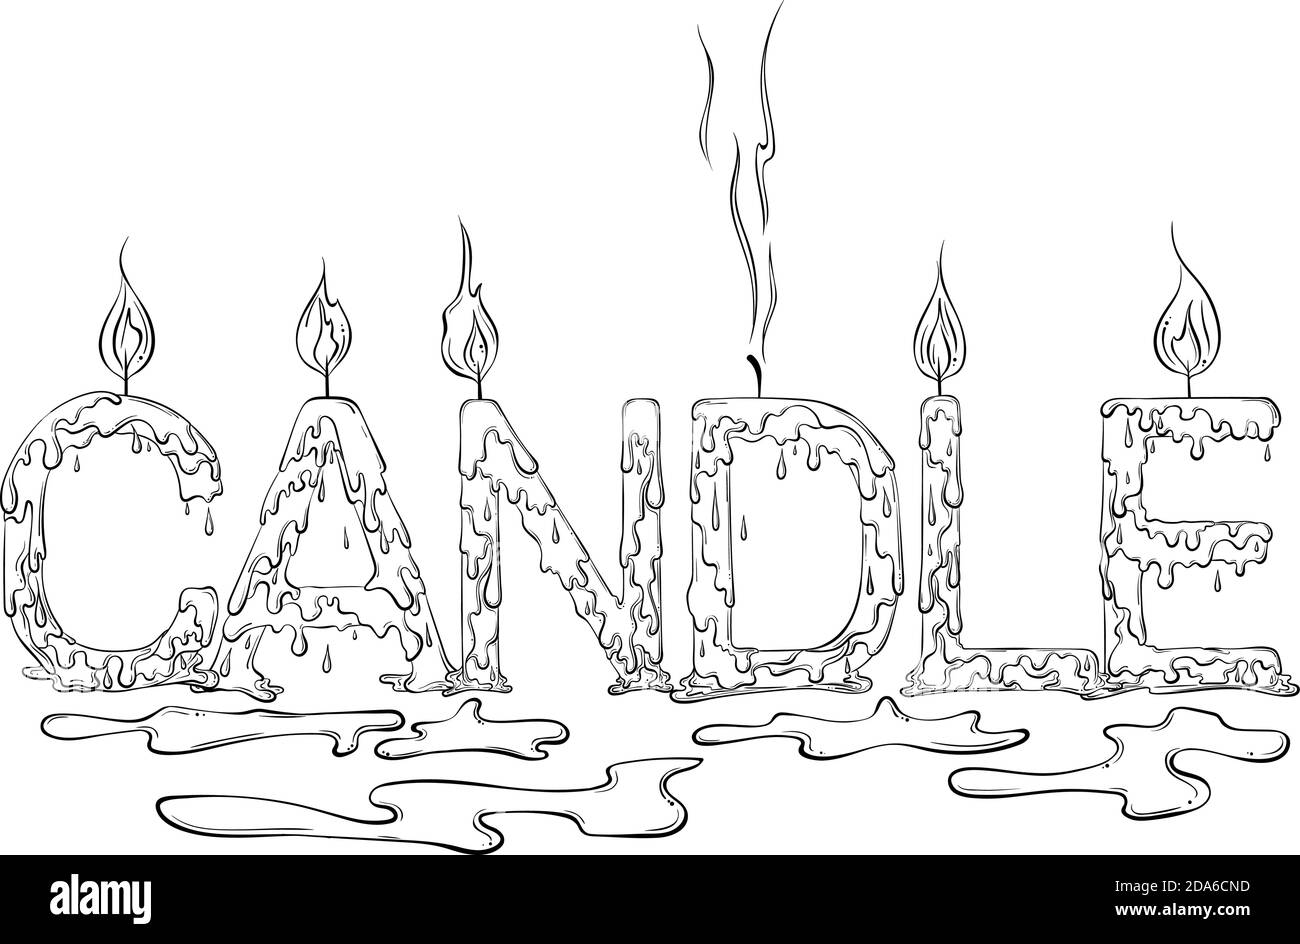 Lettering dripping word Candle in the form of burning candles. Vector illustration isolated on white background. Coloring book page in hand drawn style. Words for print, banners, posters, books. Stock Vector